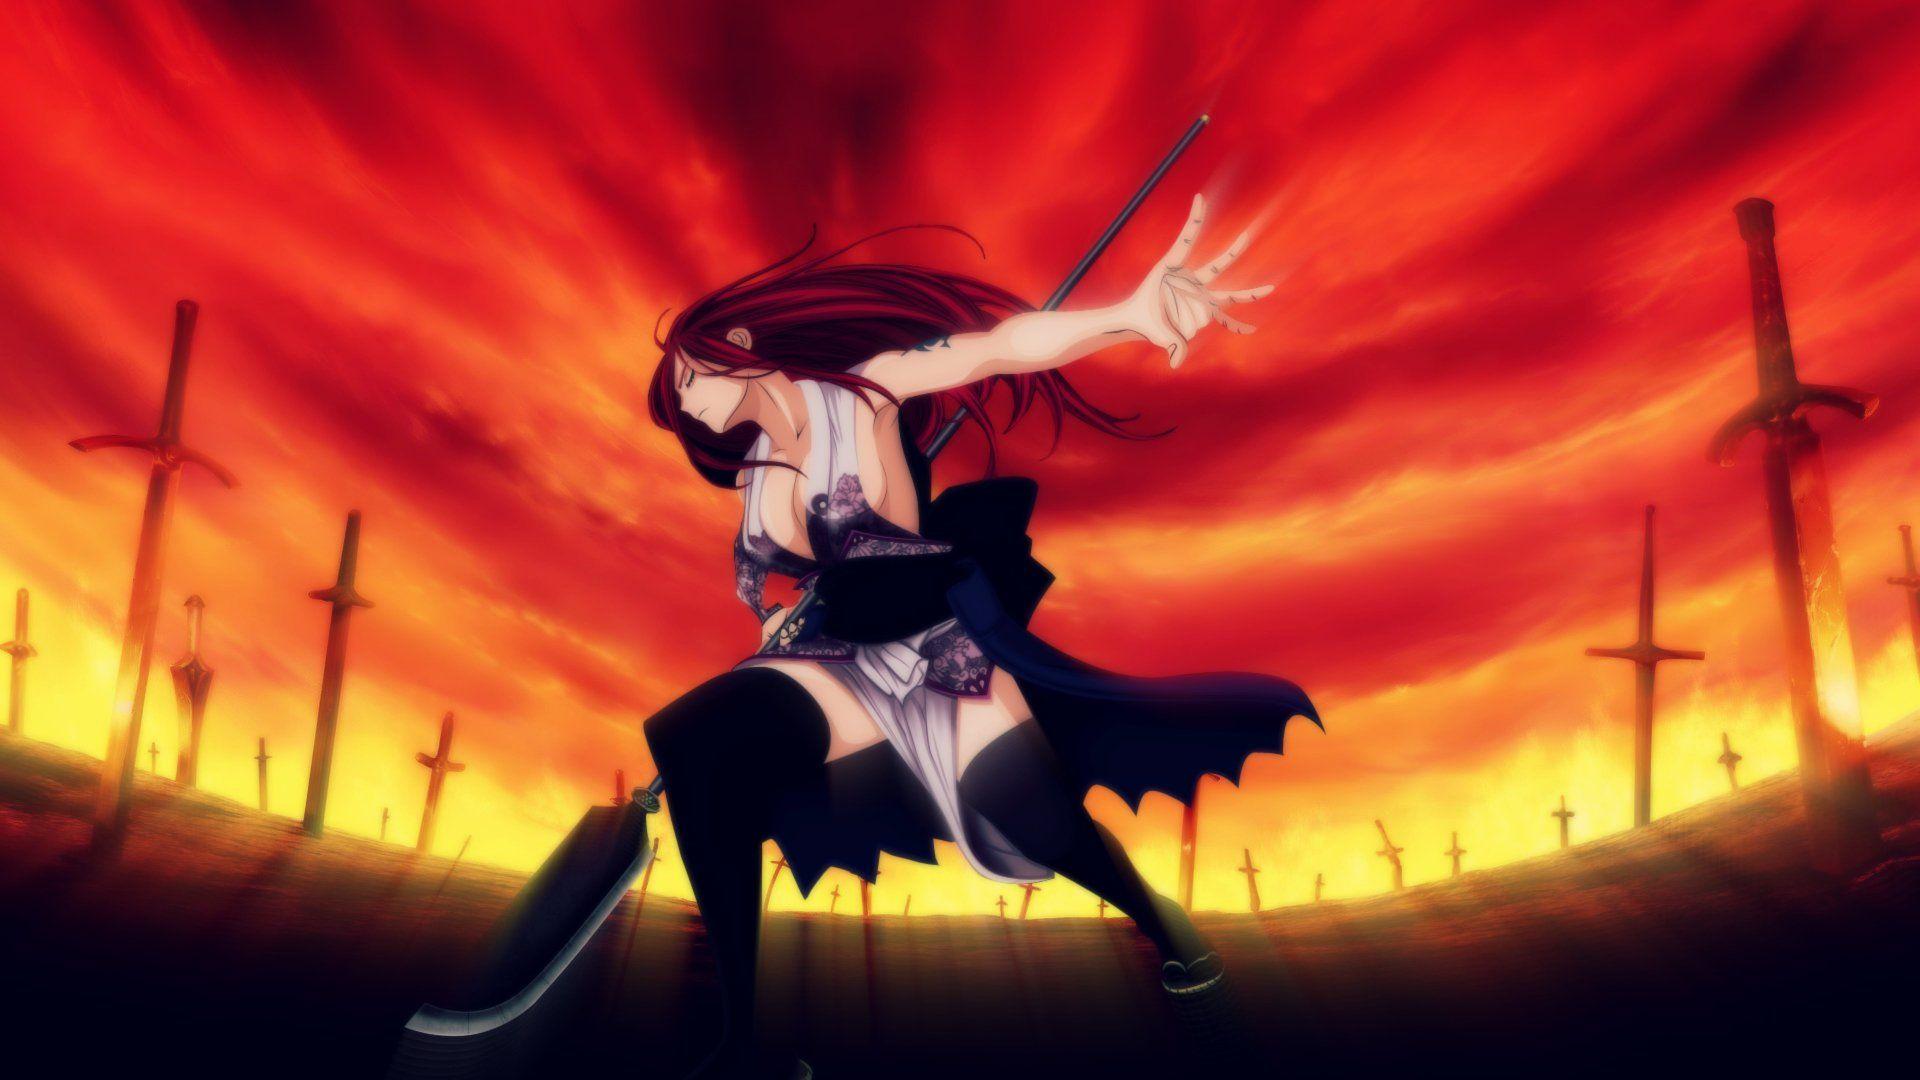 Erza Scarlet - Character (12249) - AniDB